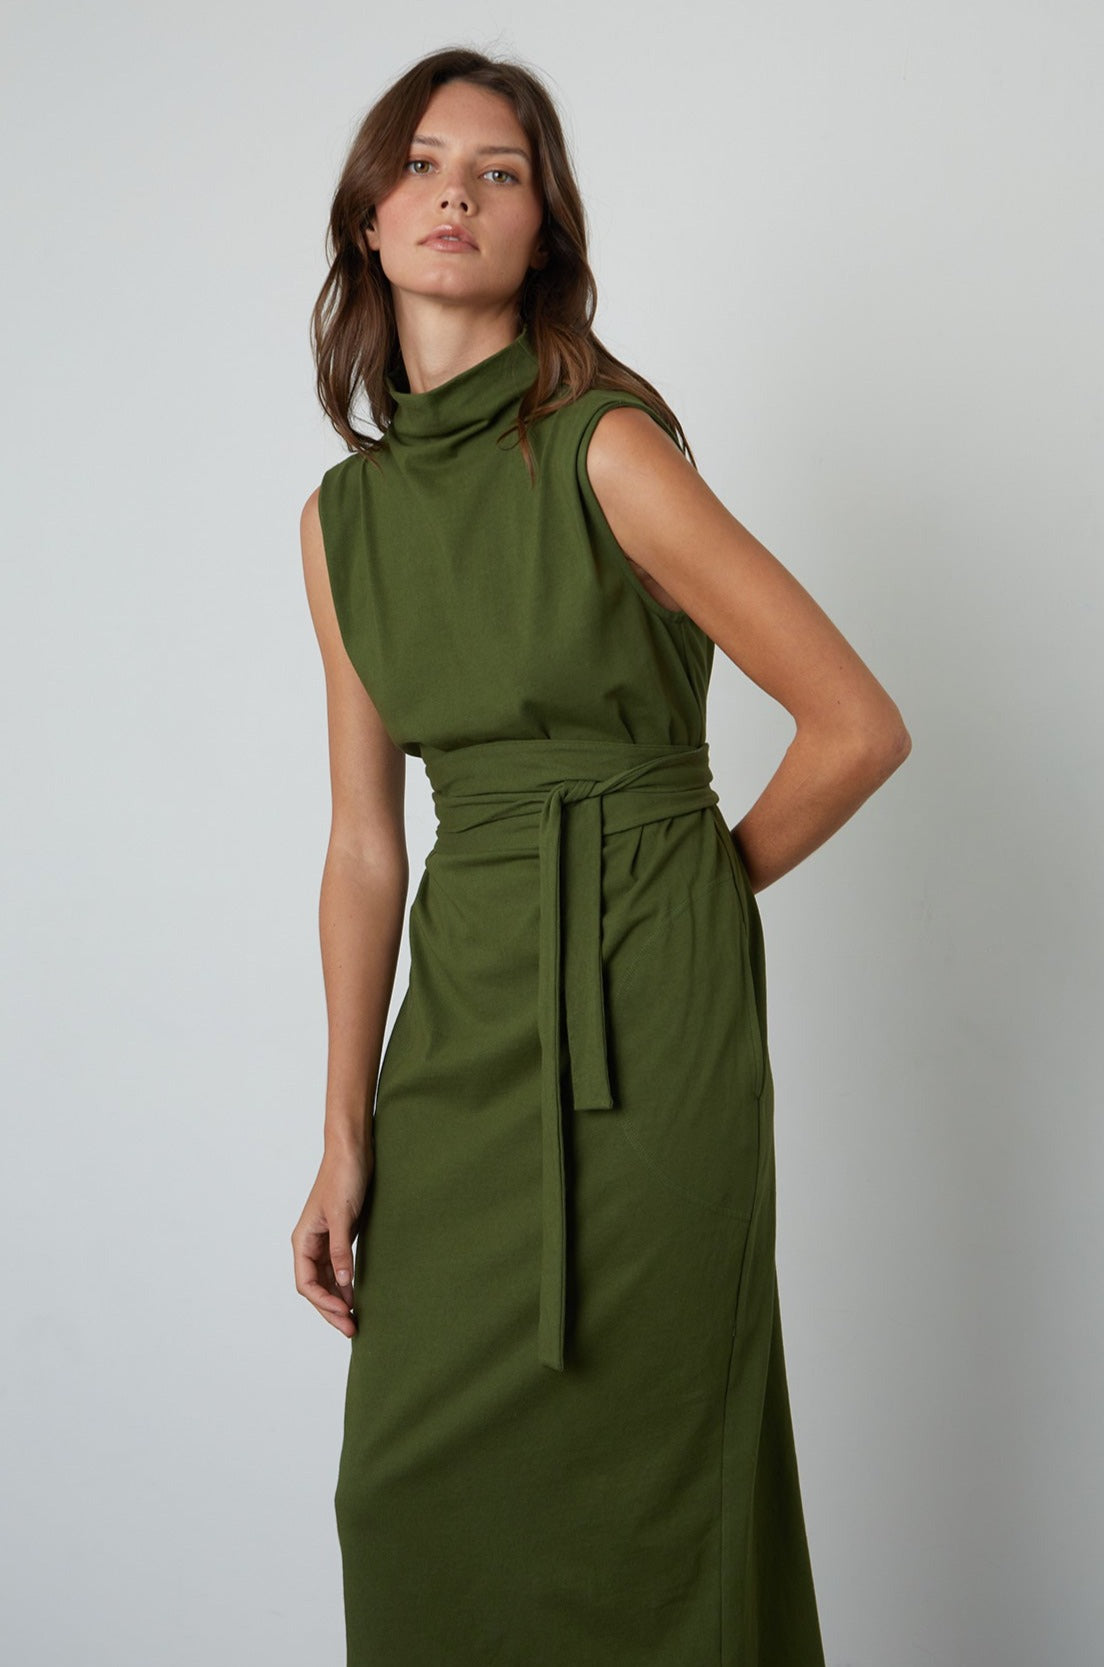 Hydie Mock Neck Dress Structured Cotton in Evergreen with belt close up view-24994486386881